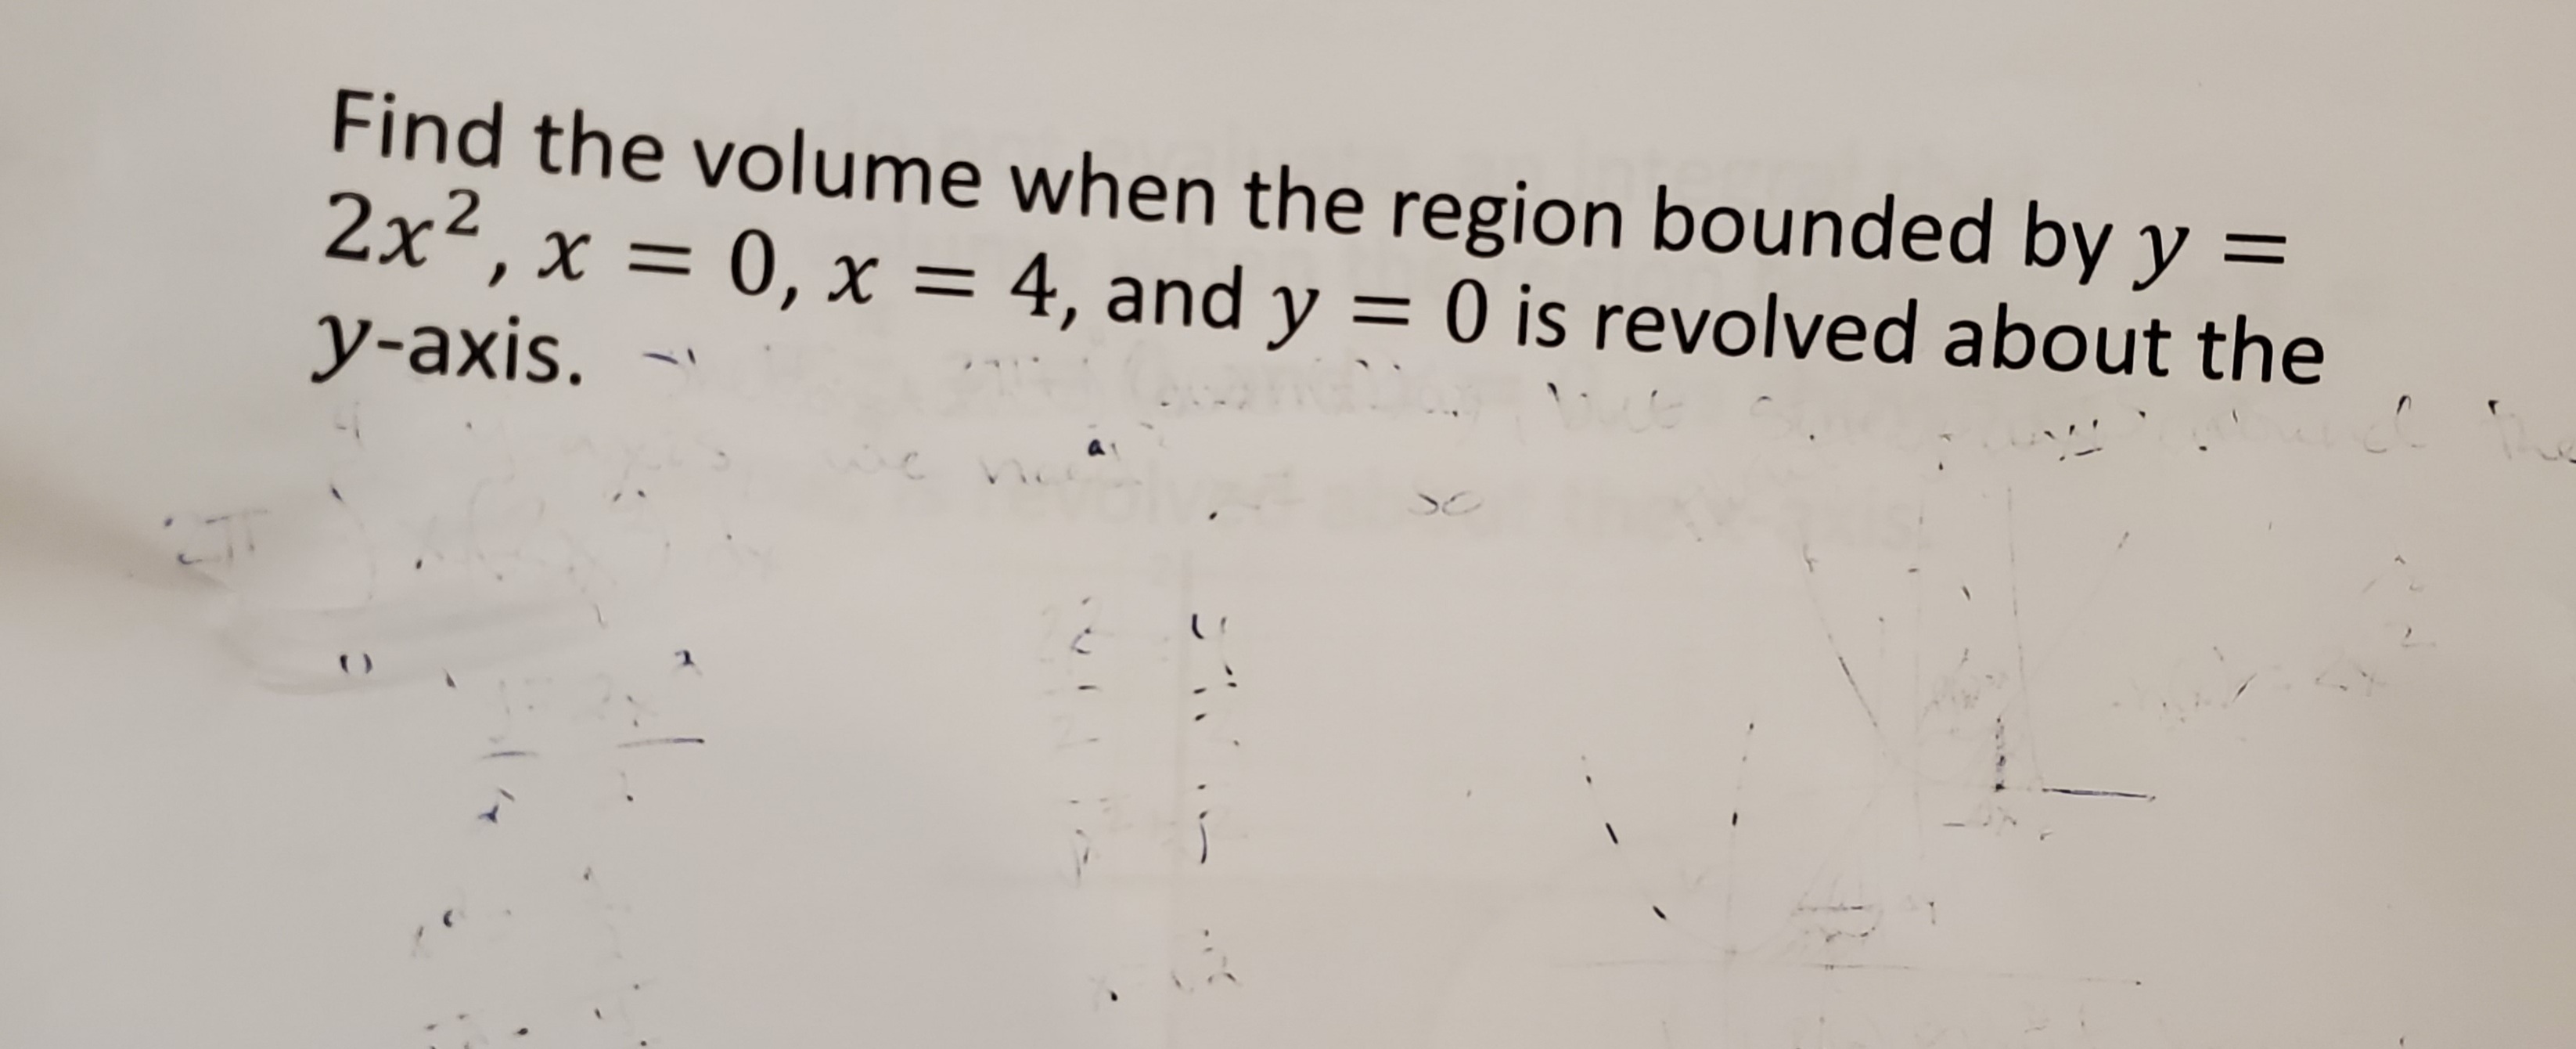 Find the volume when the region bounded by y =
2x², x = 0, x = 4, and y = 0 is revolved about the
y-axis.
